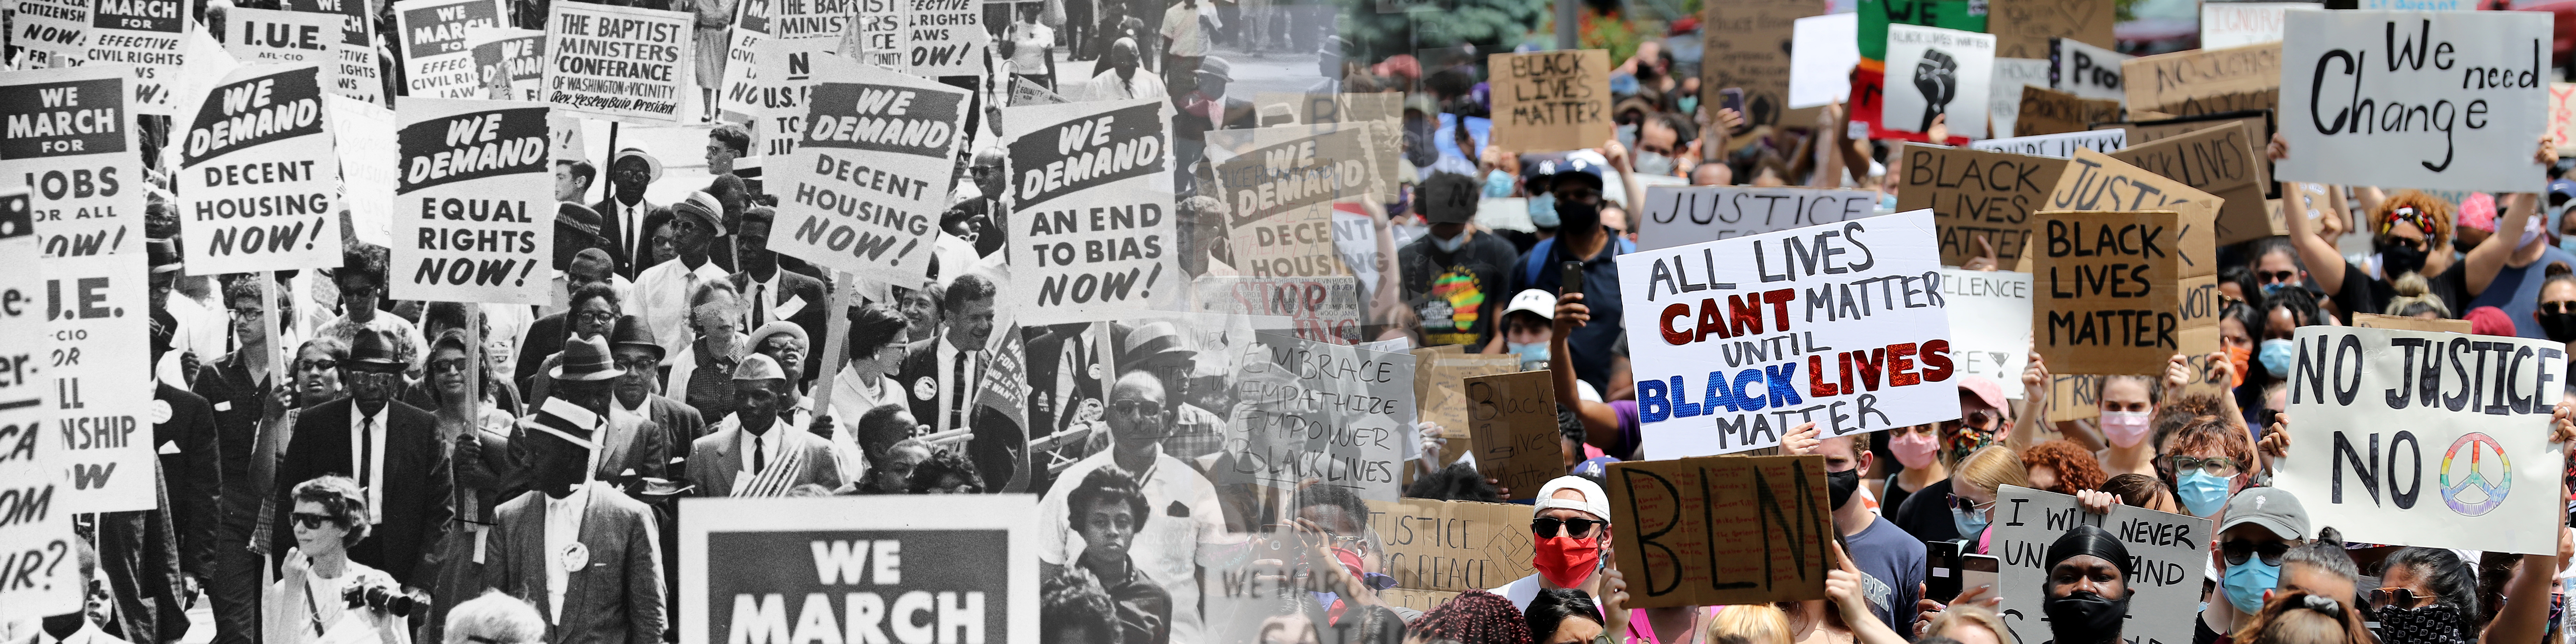 two images blended together, the one on the left in black and white and the other in color, of protests